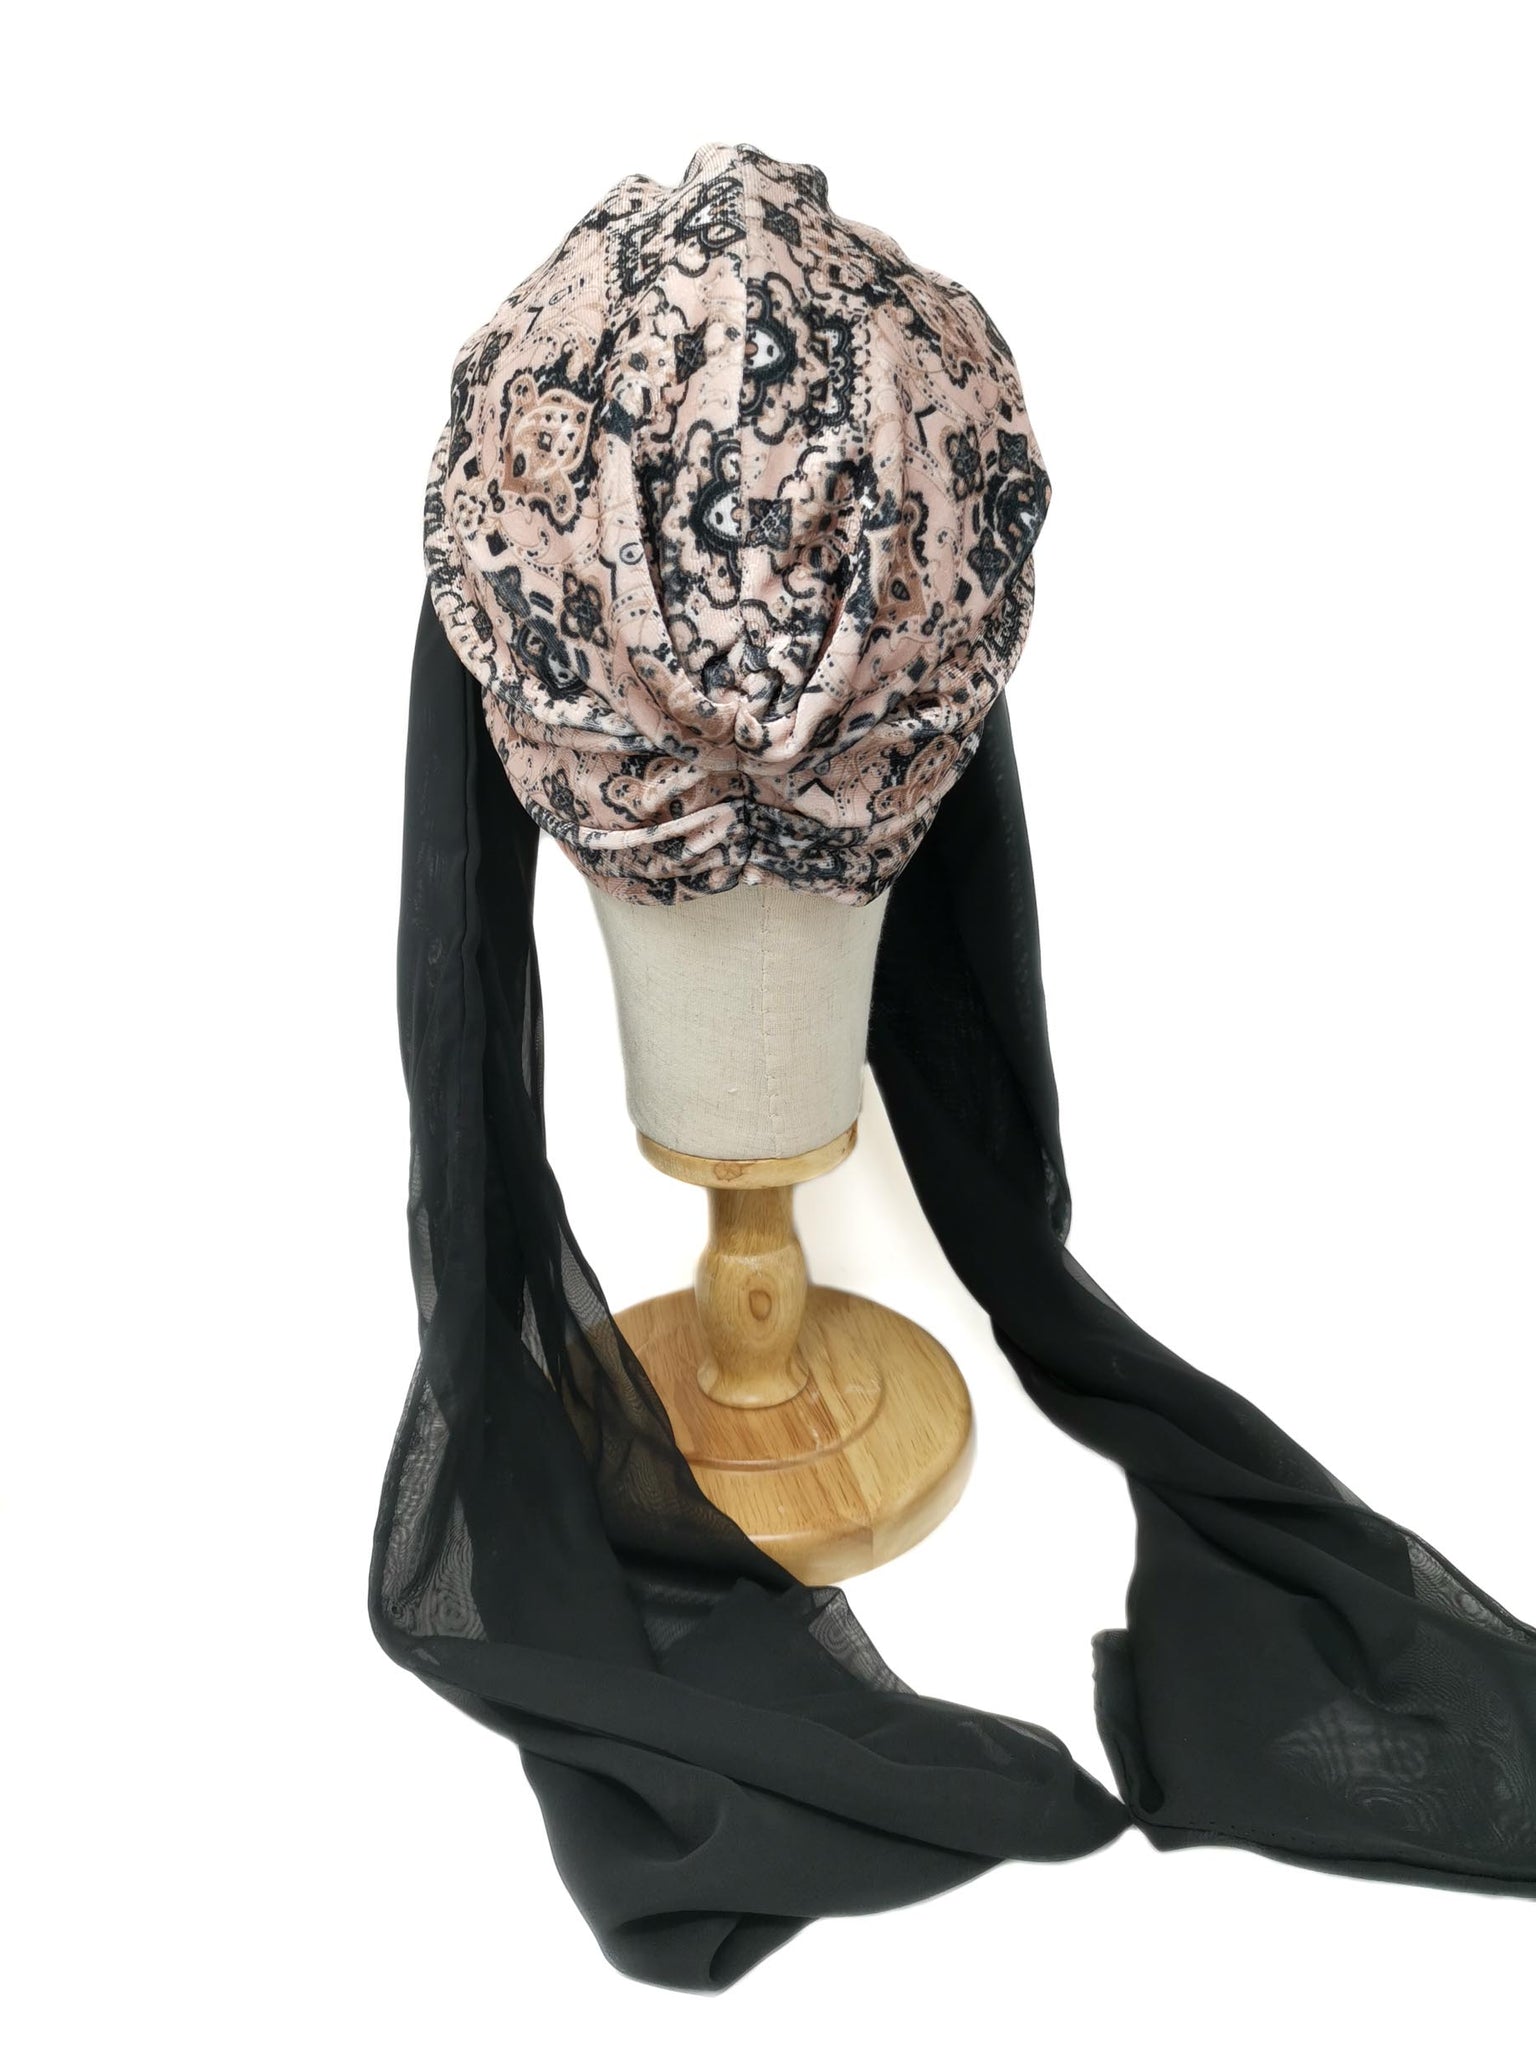 Pink velvet cashmere patterned "Rose" turban with black chiffon scarf